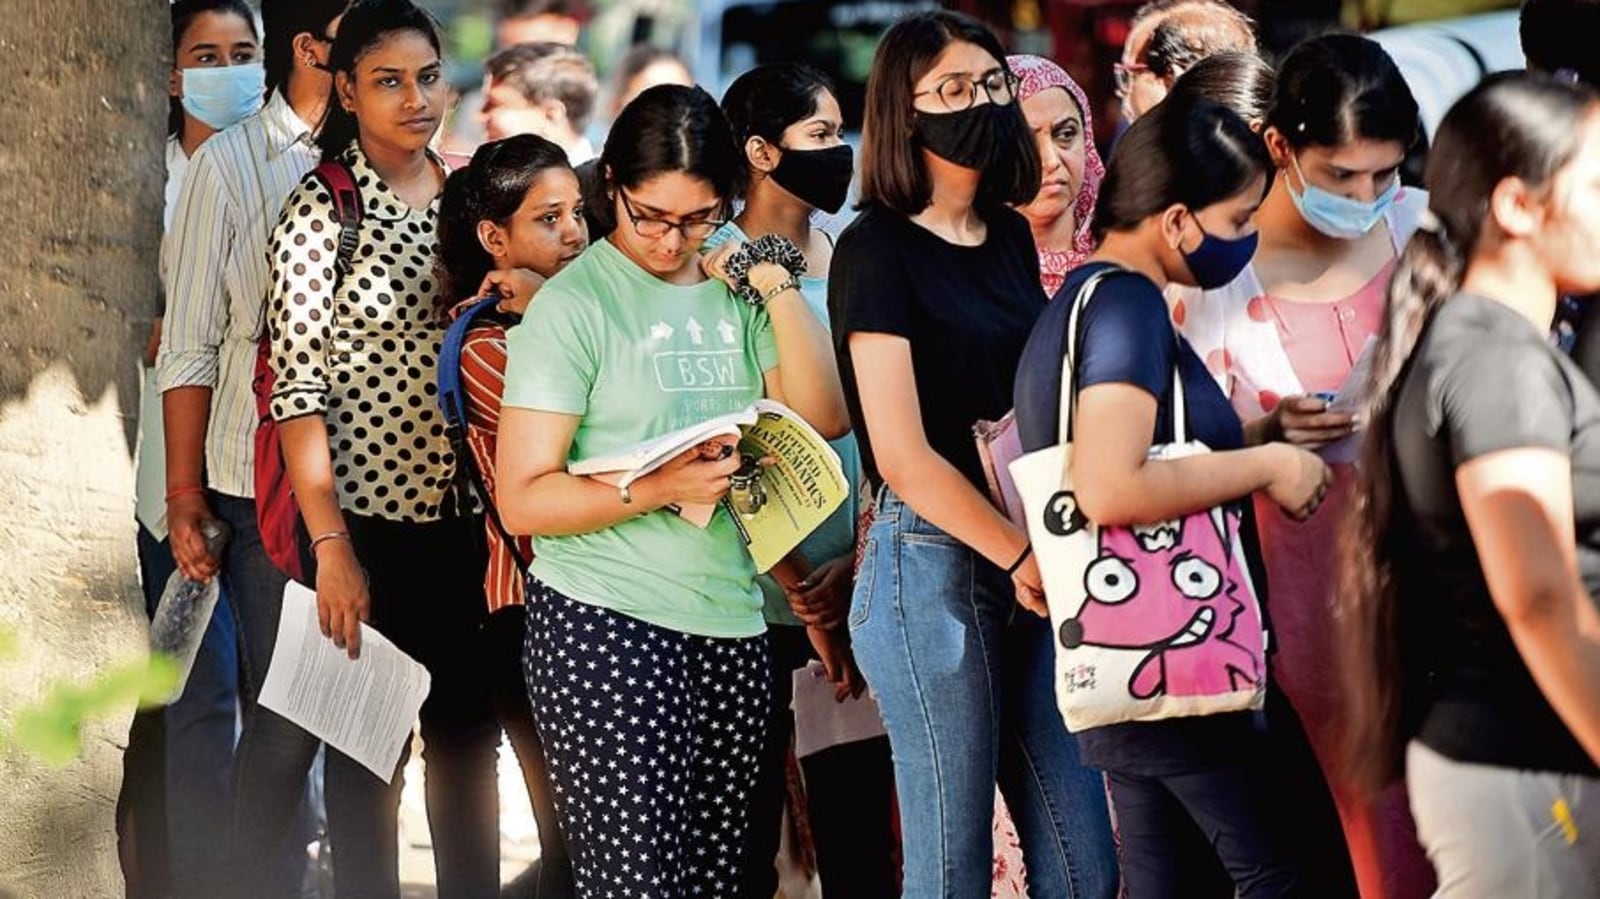 CUET PG Result 2022 Live Updates: Latest updates on NTA CUET PG results